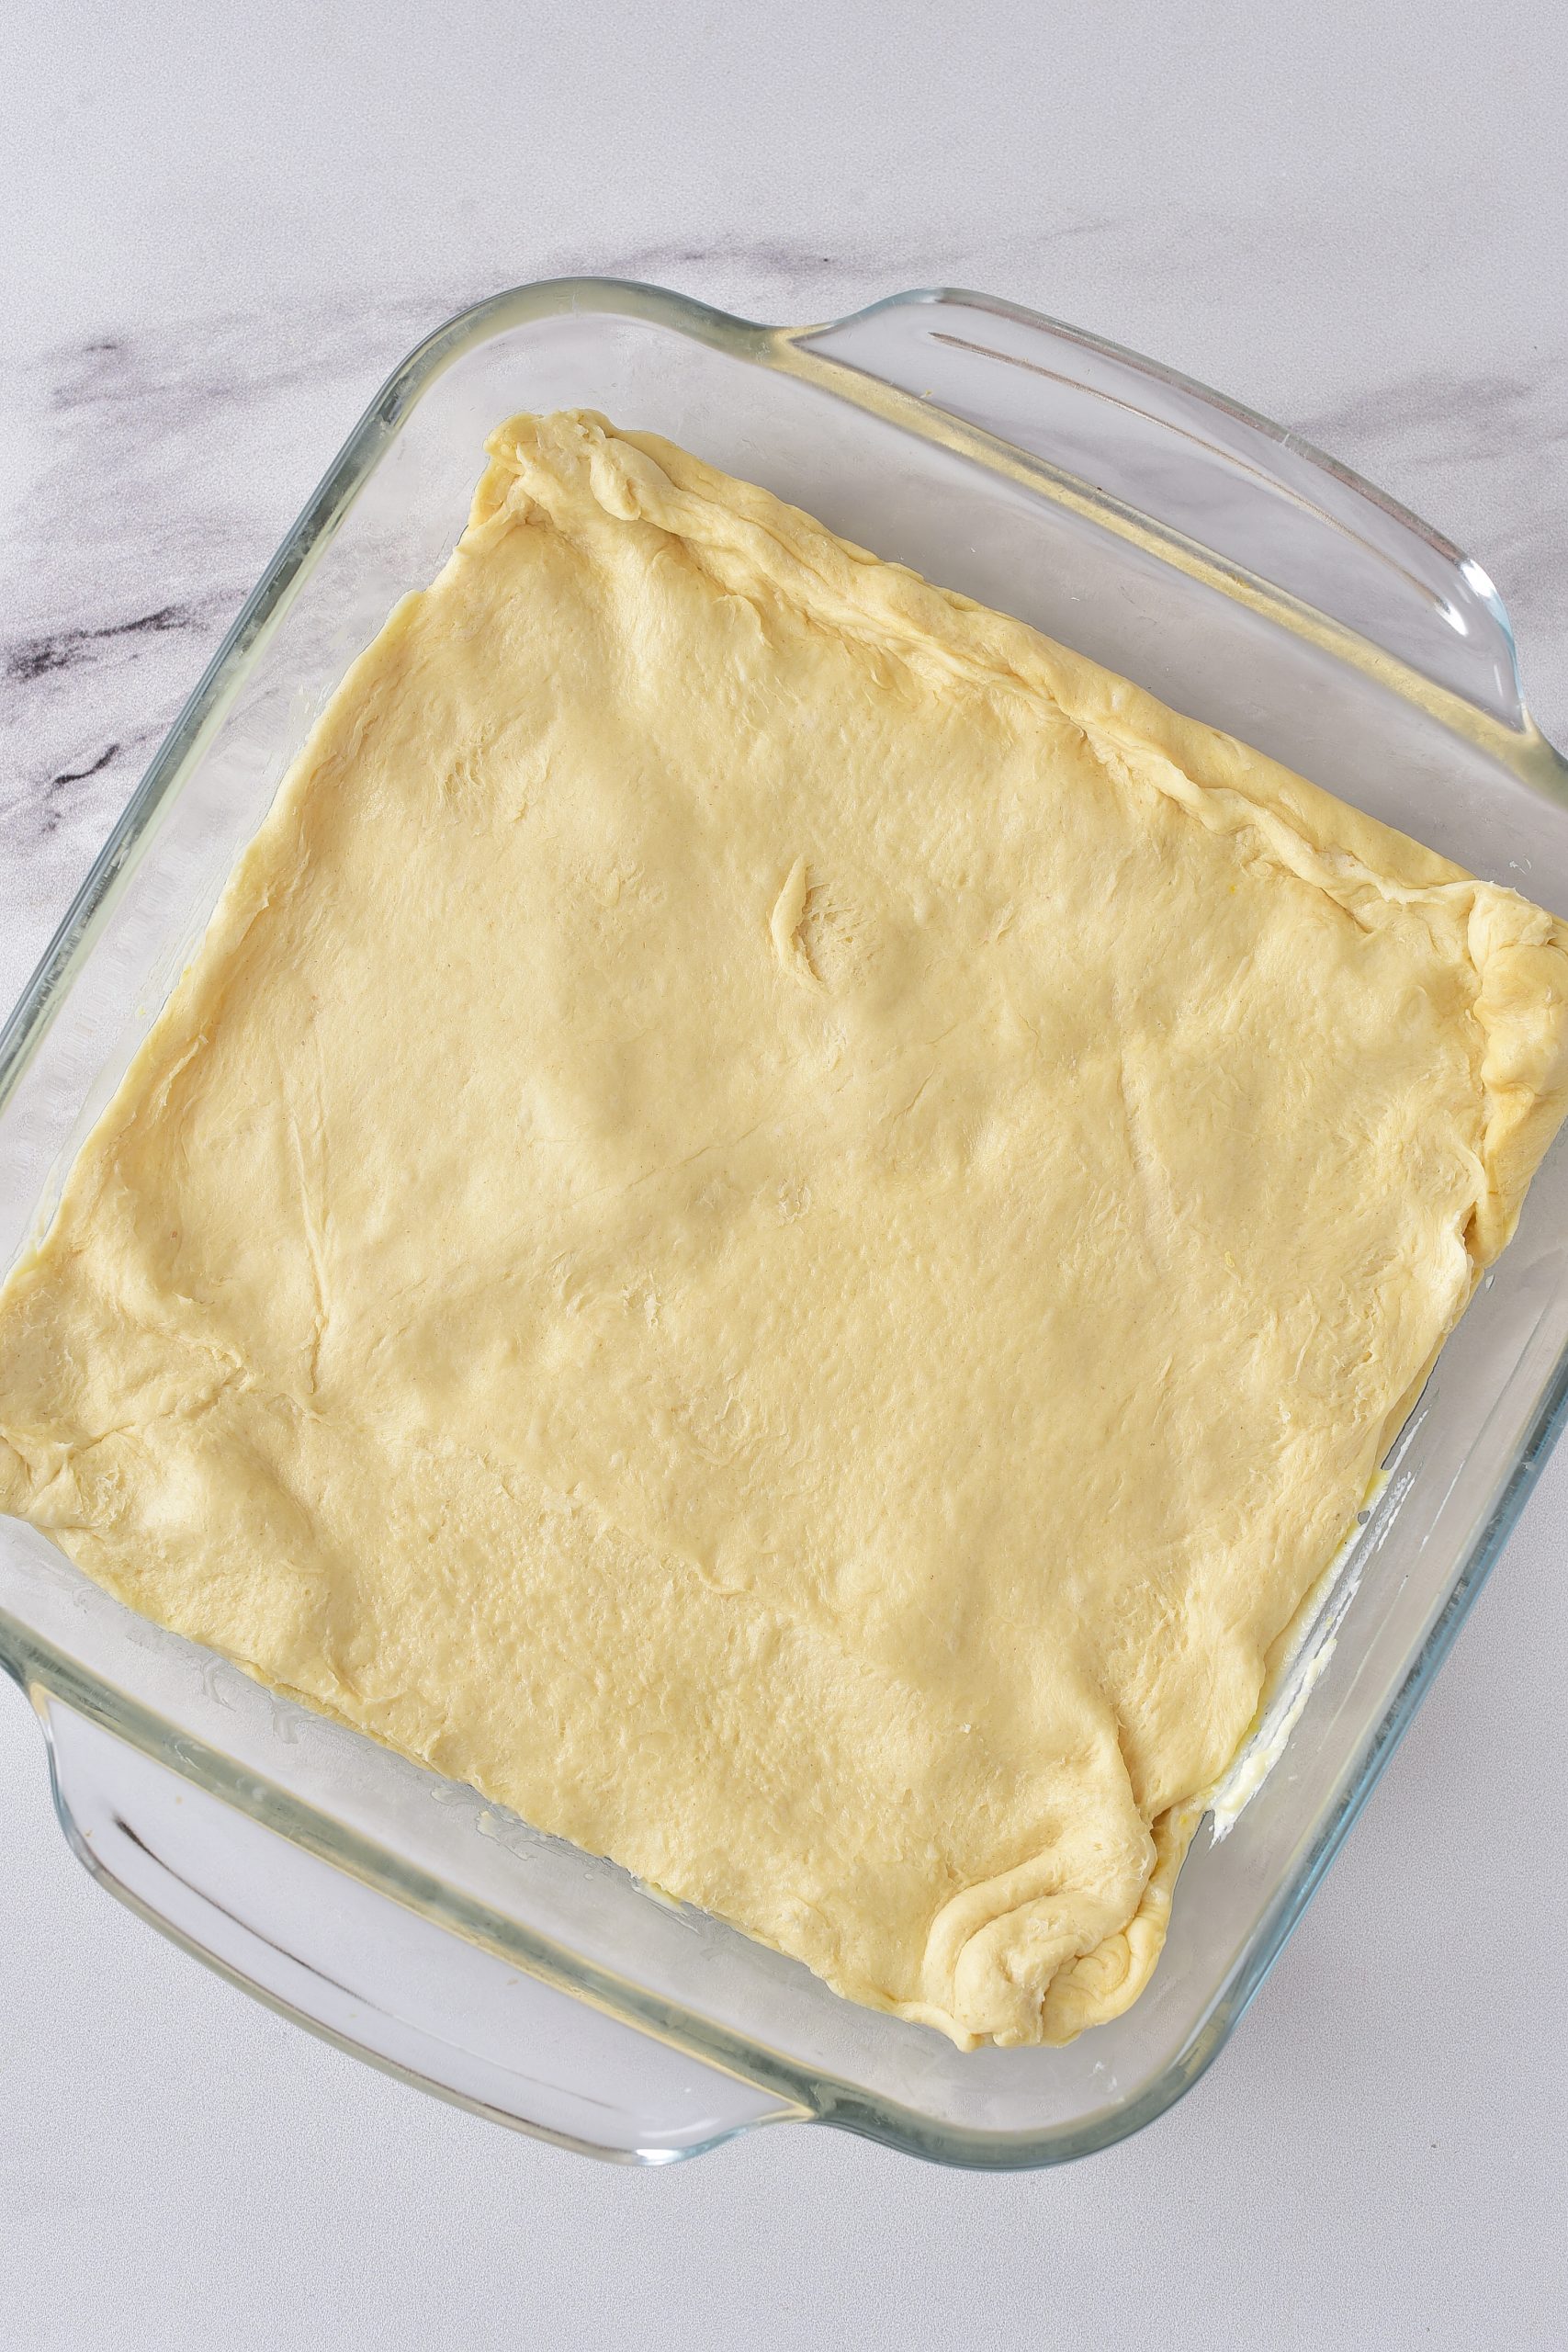 Top the filling with the remaining layer of dough